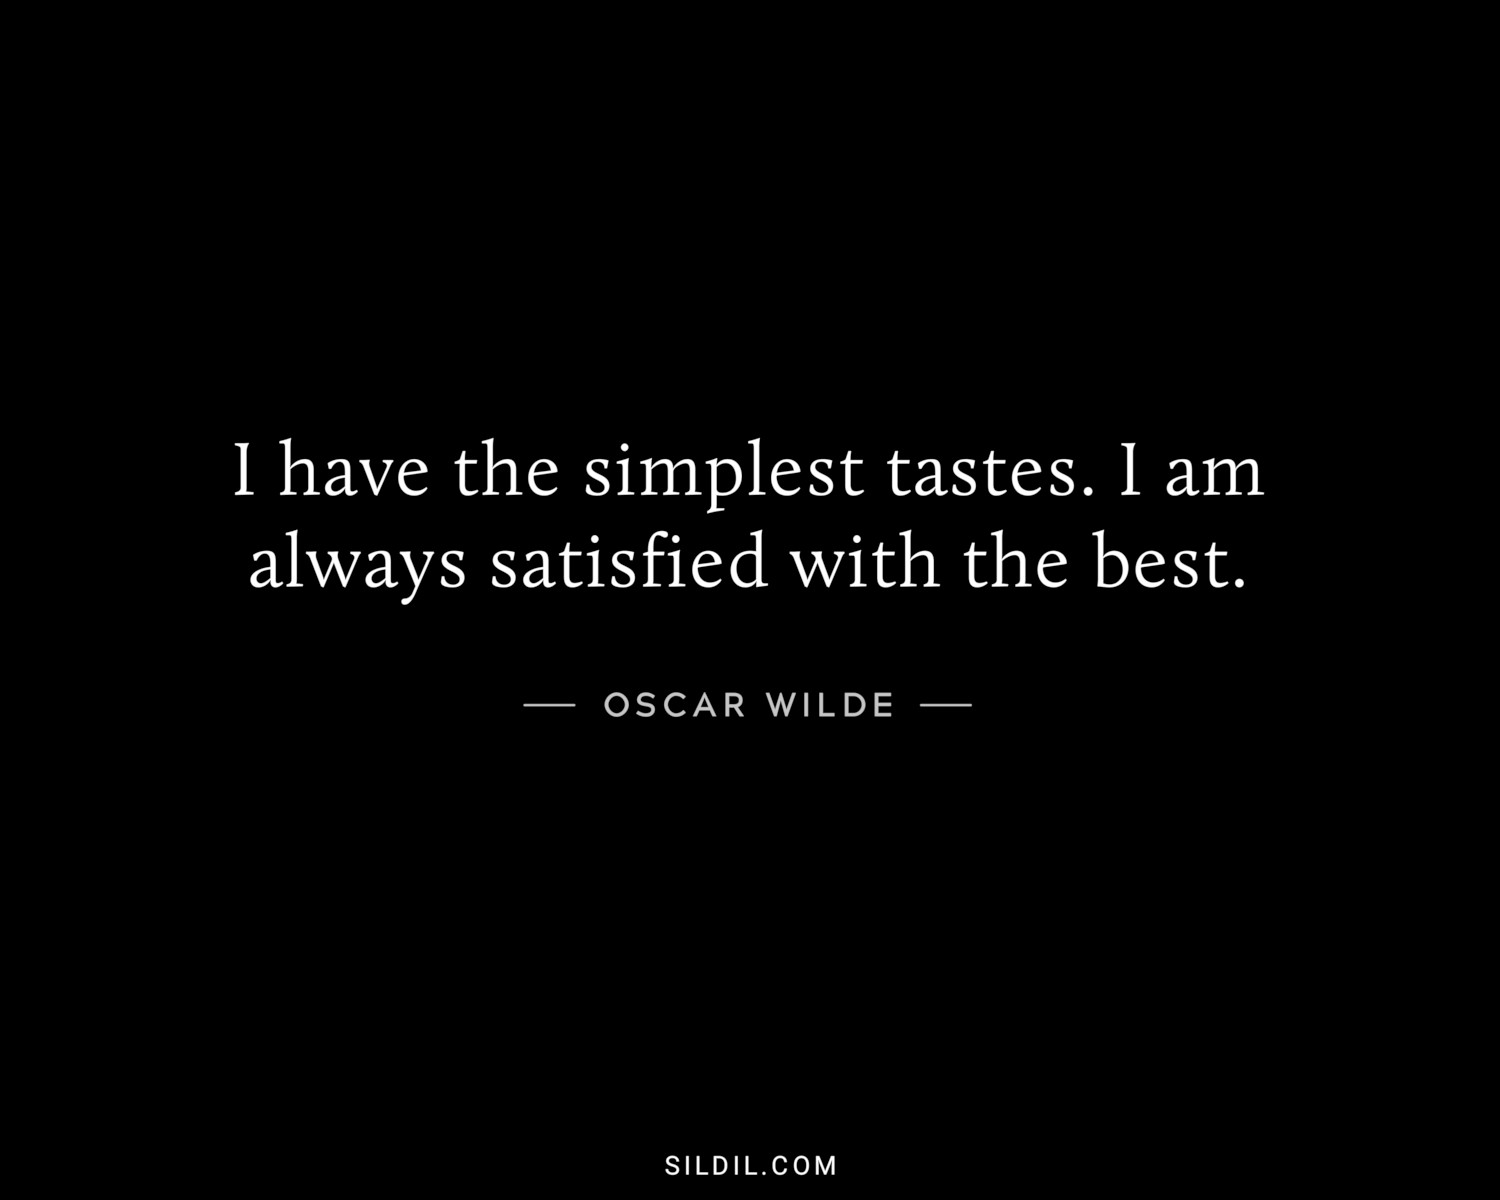 I have the simplest tastes. I am always satisfied with the best.